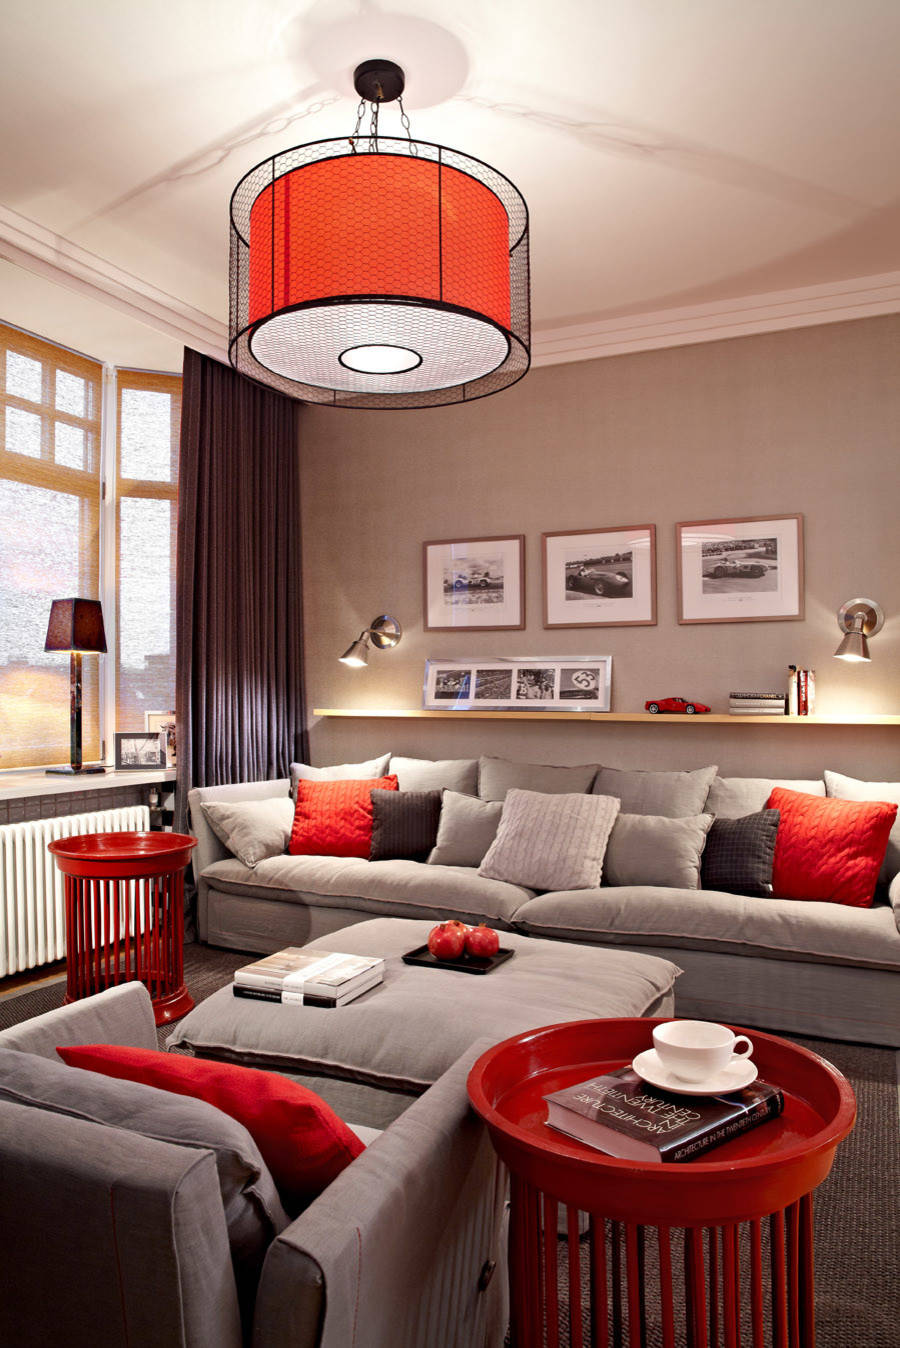 Red And Gray Living Room Ideas Photos Houzz